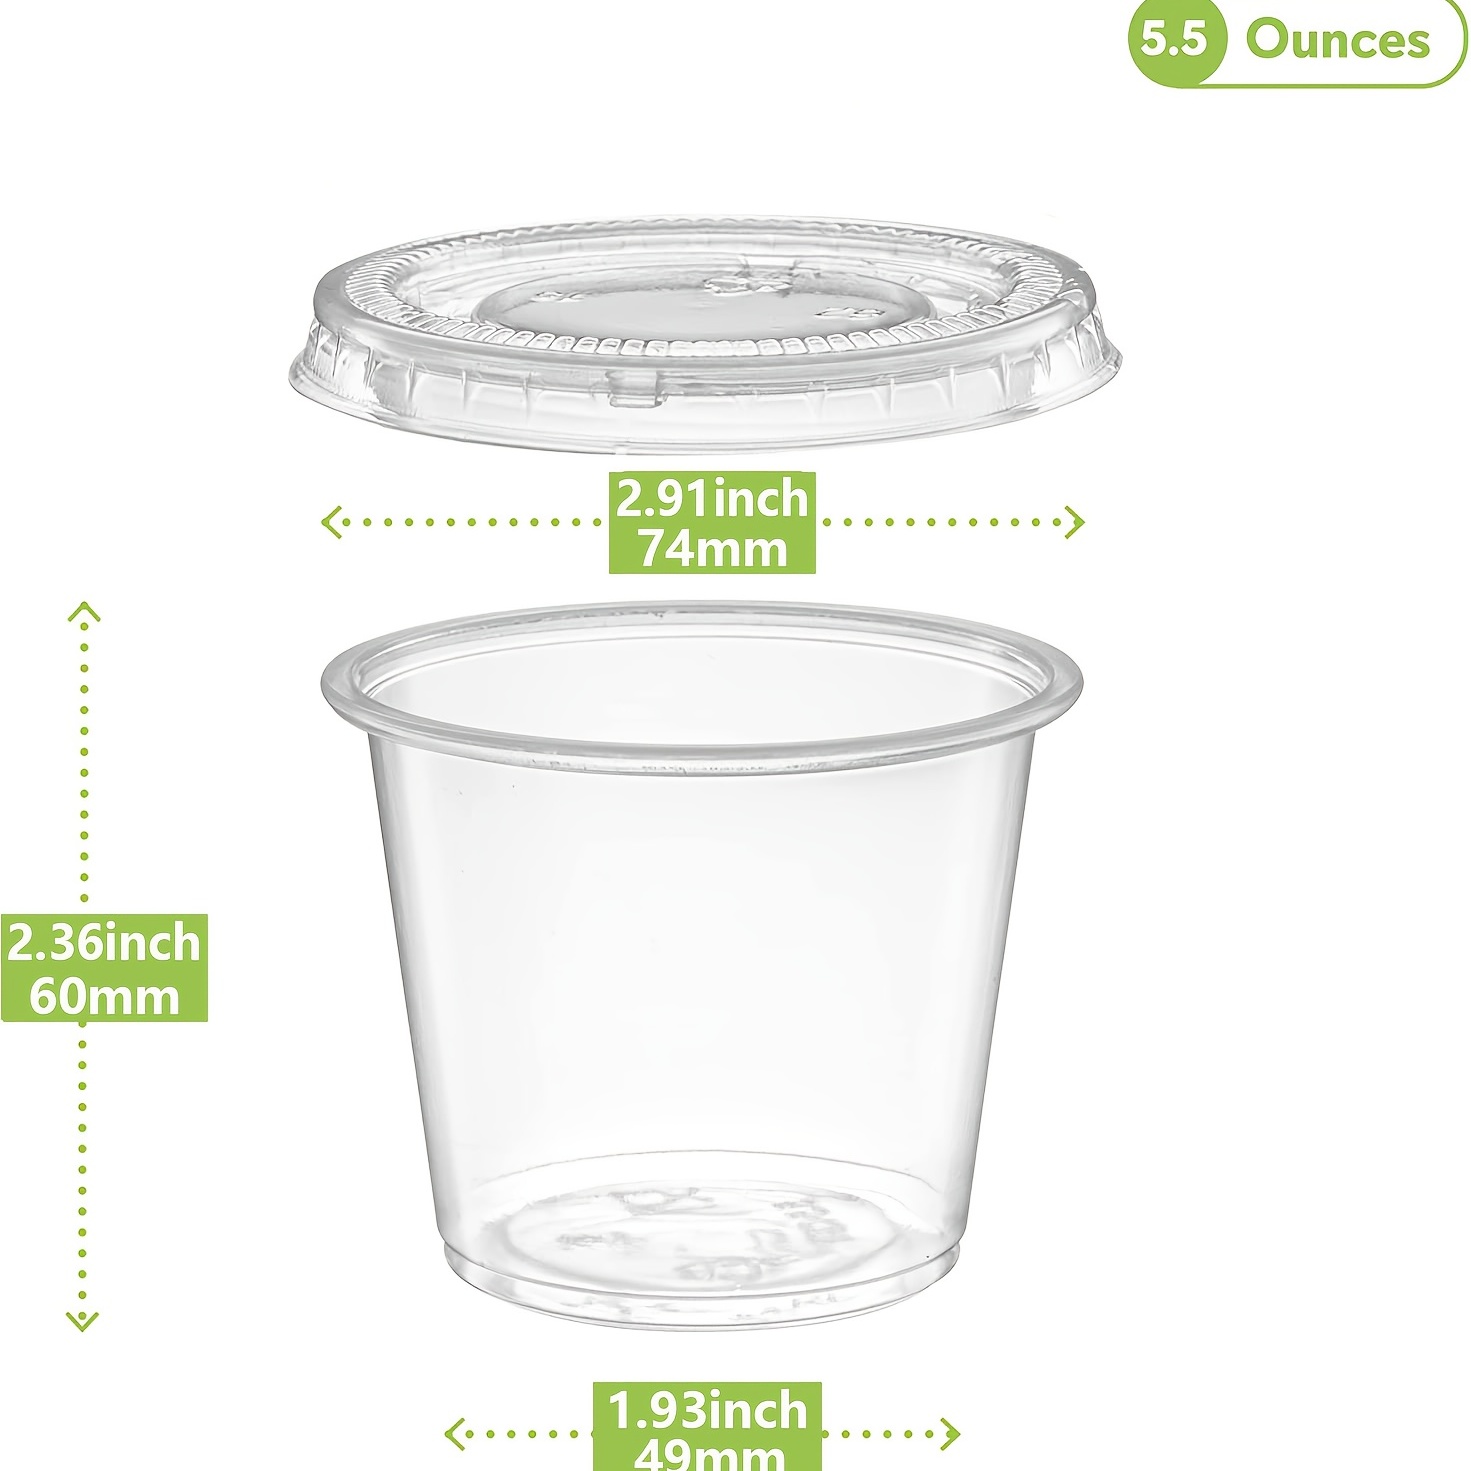 Zeml Portion Cups with Lids (5.5 Ounces, 100 Pack) | Disposable Plastic Cups for Meal Prep, Portion Control, Salad Dressing, Jello Shots, Slime & Medi